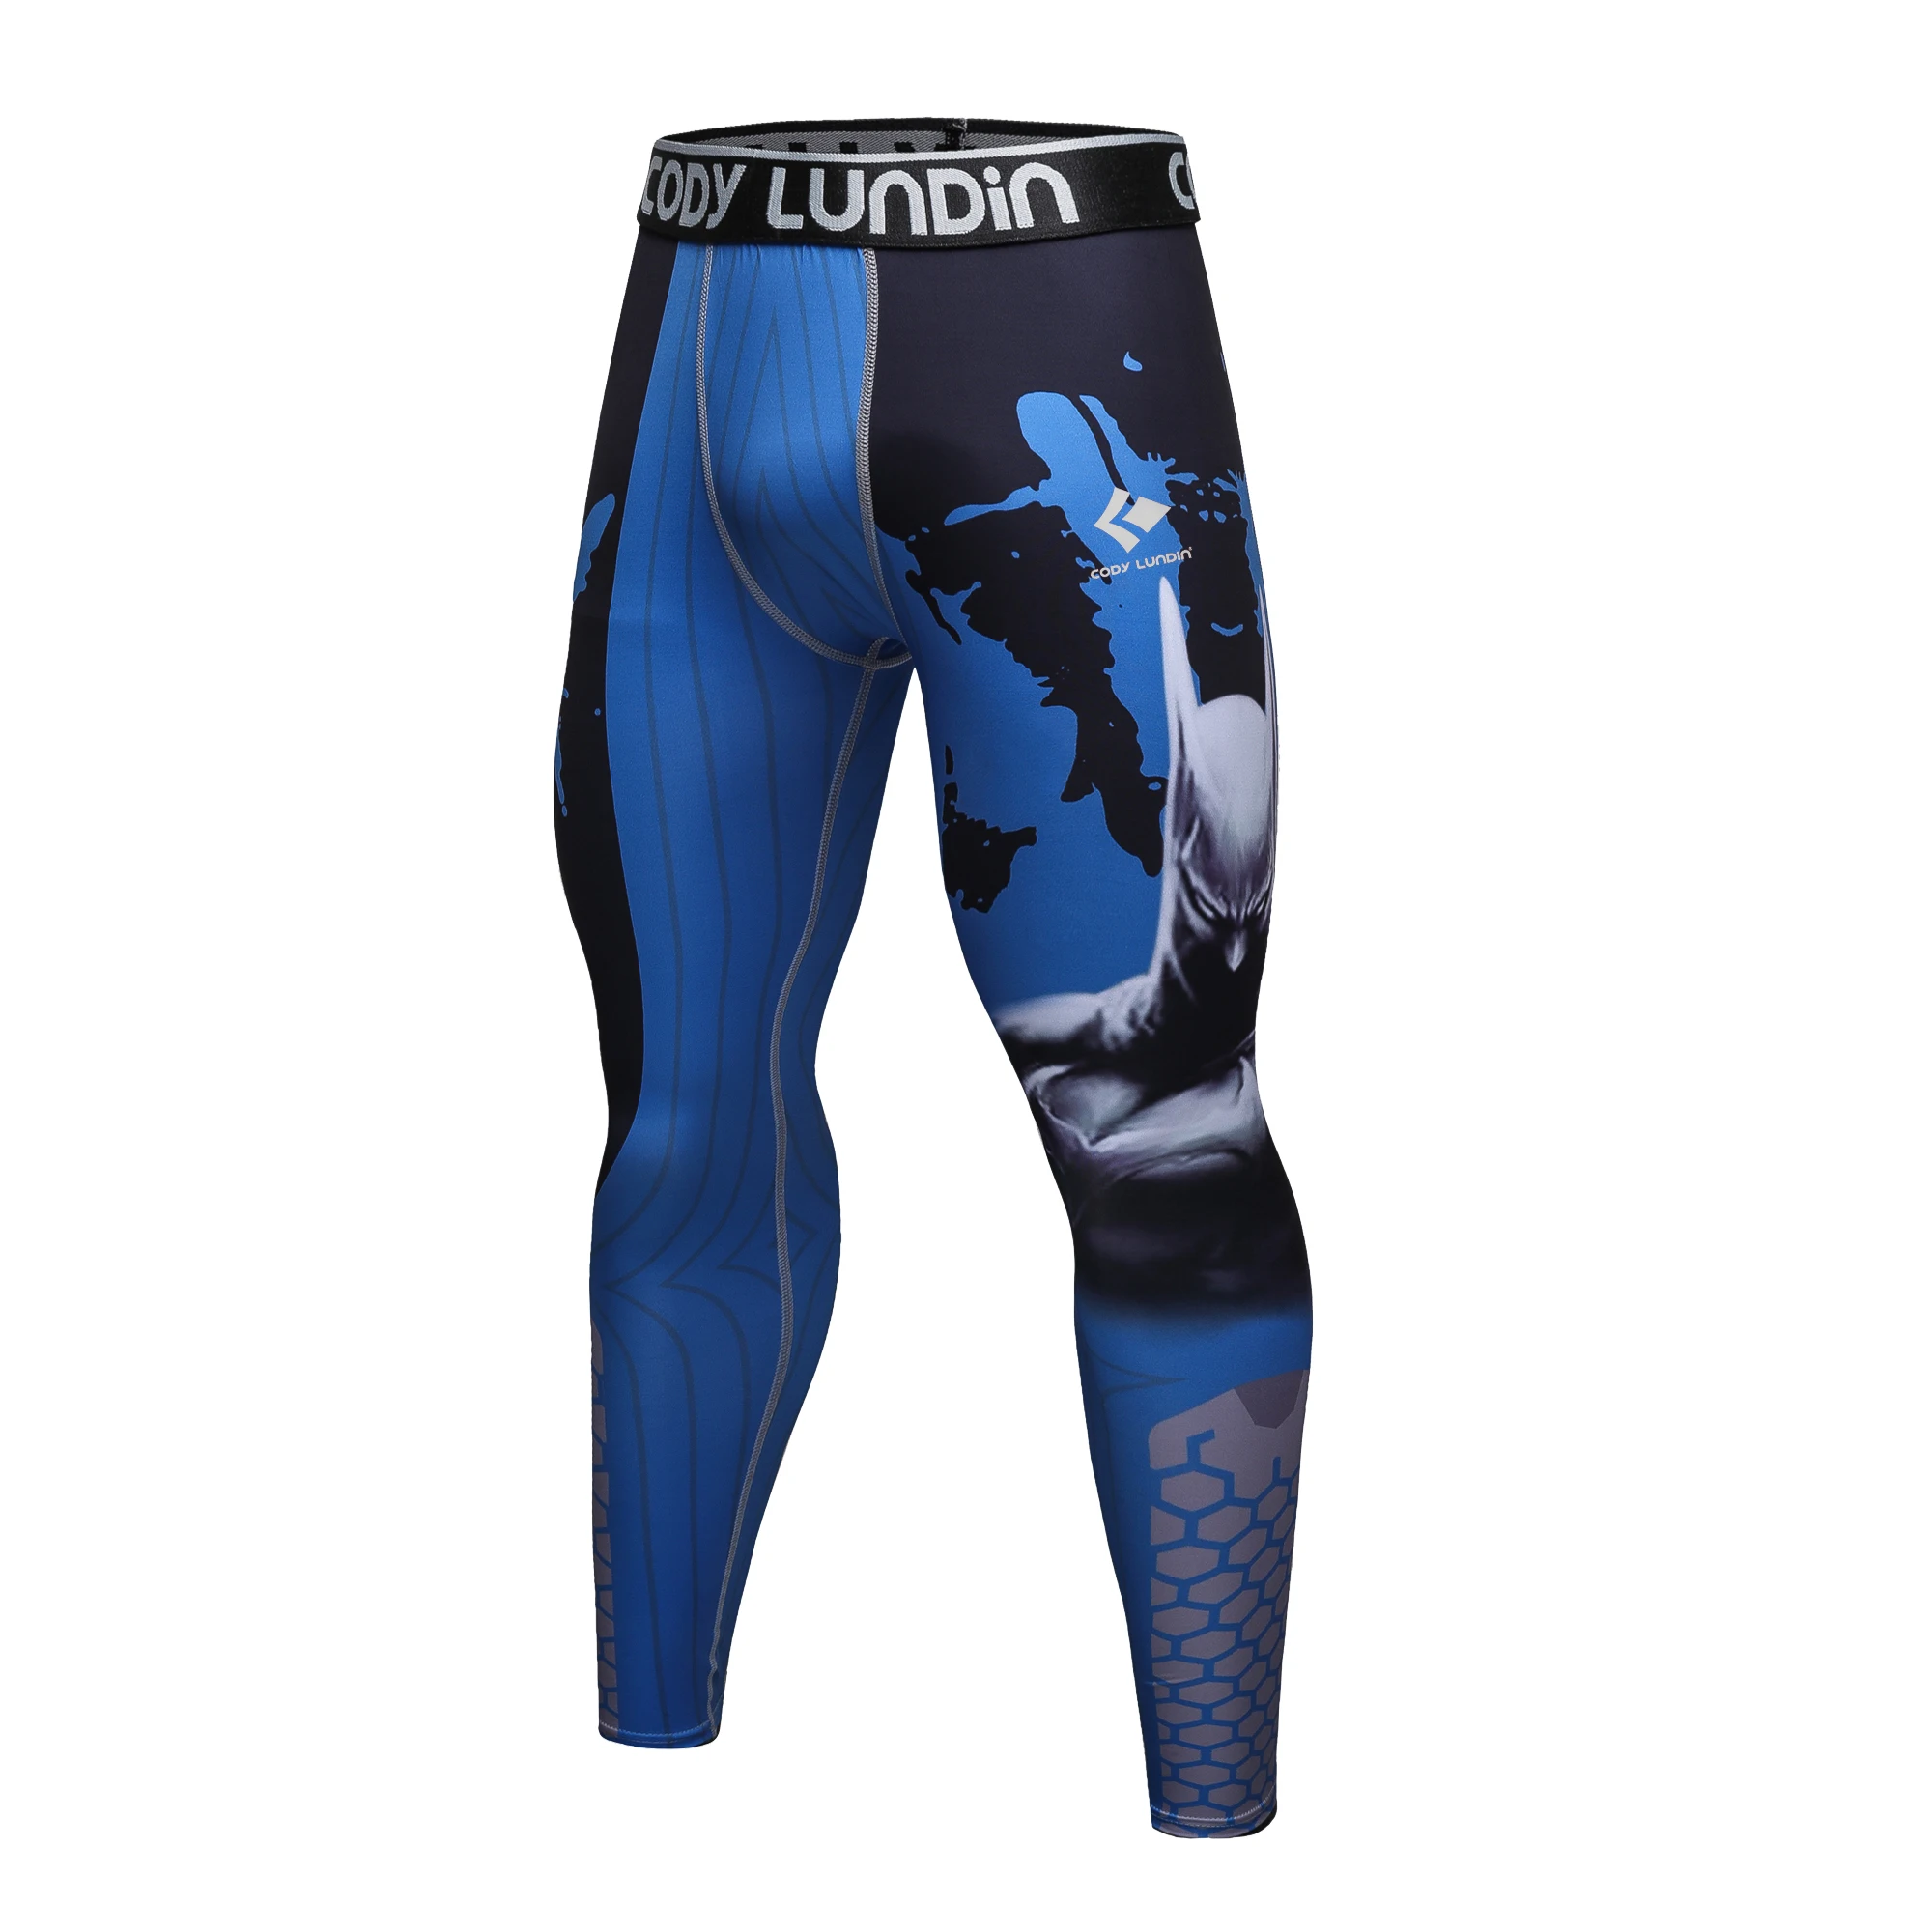 

Cody Lundin Men's Sweatpants Compression Quick Dry Polyester Tight Fitness Workout Leggings Men Tights Gym MMA BJJ Trousers